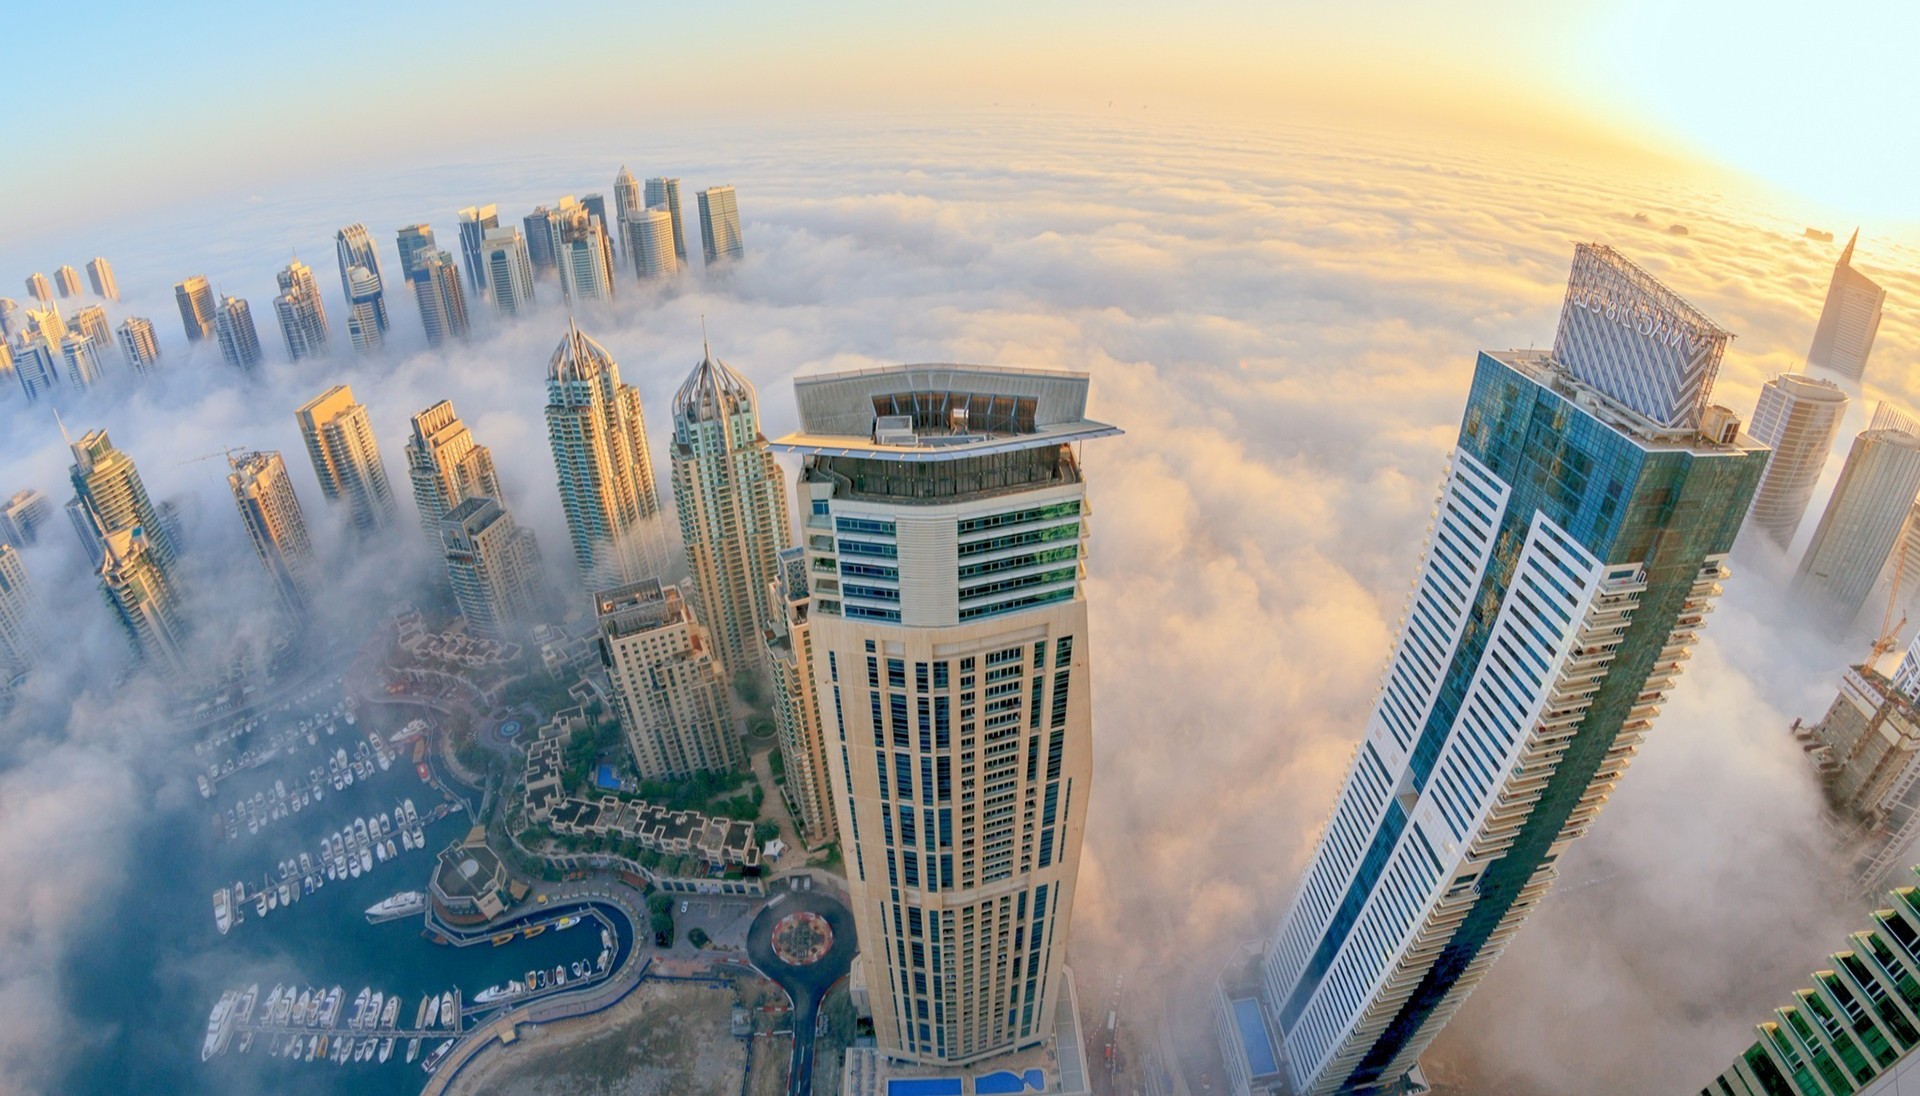 Find the best job openings in Dubai straight from our website